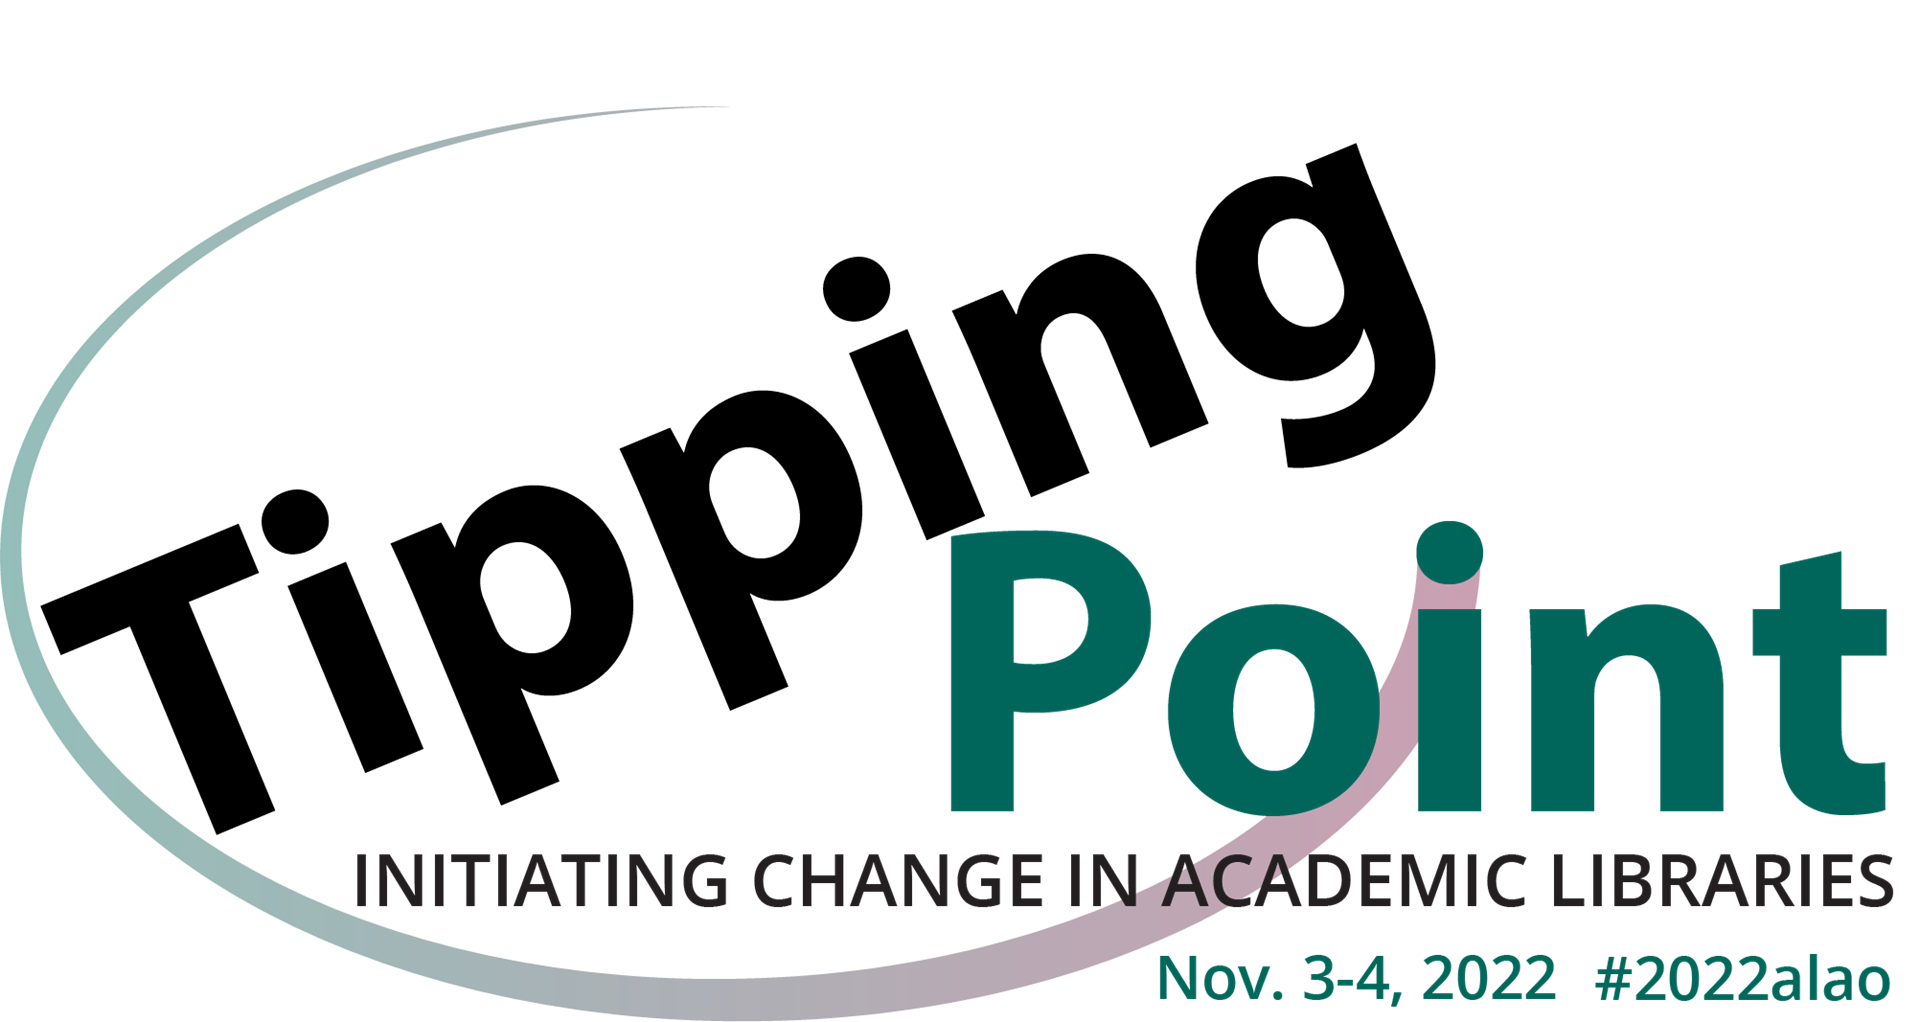 Tipping Point: Initiating Change in Academic Libraries. Nov. 3-4, 2022 #2022alao